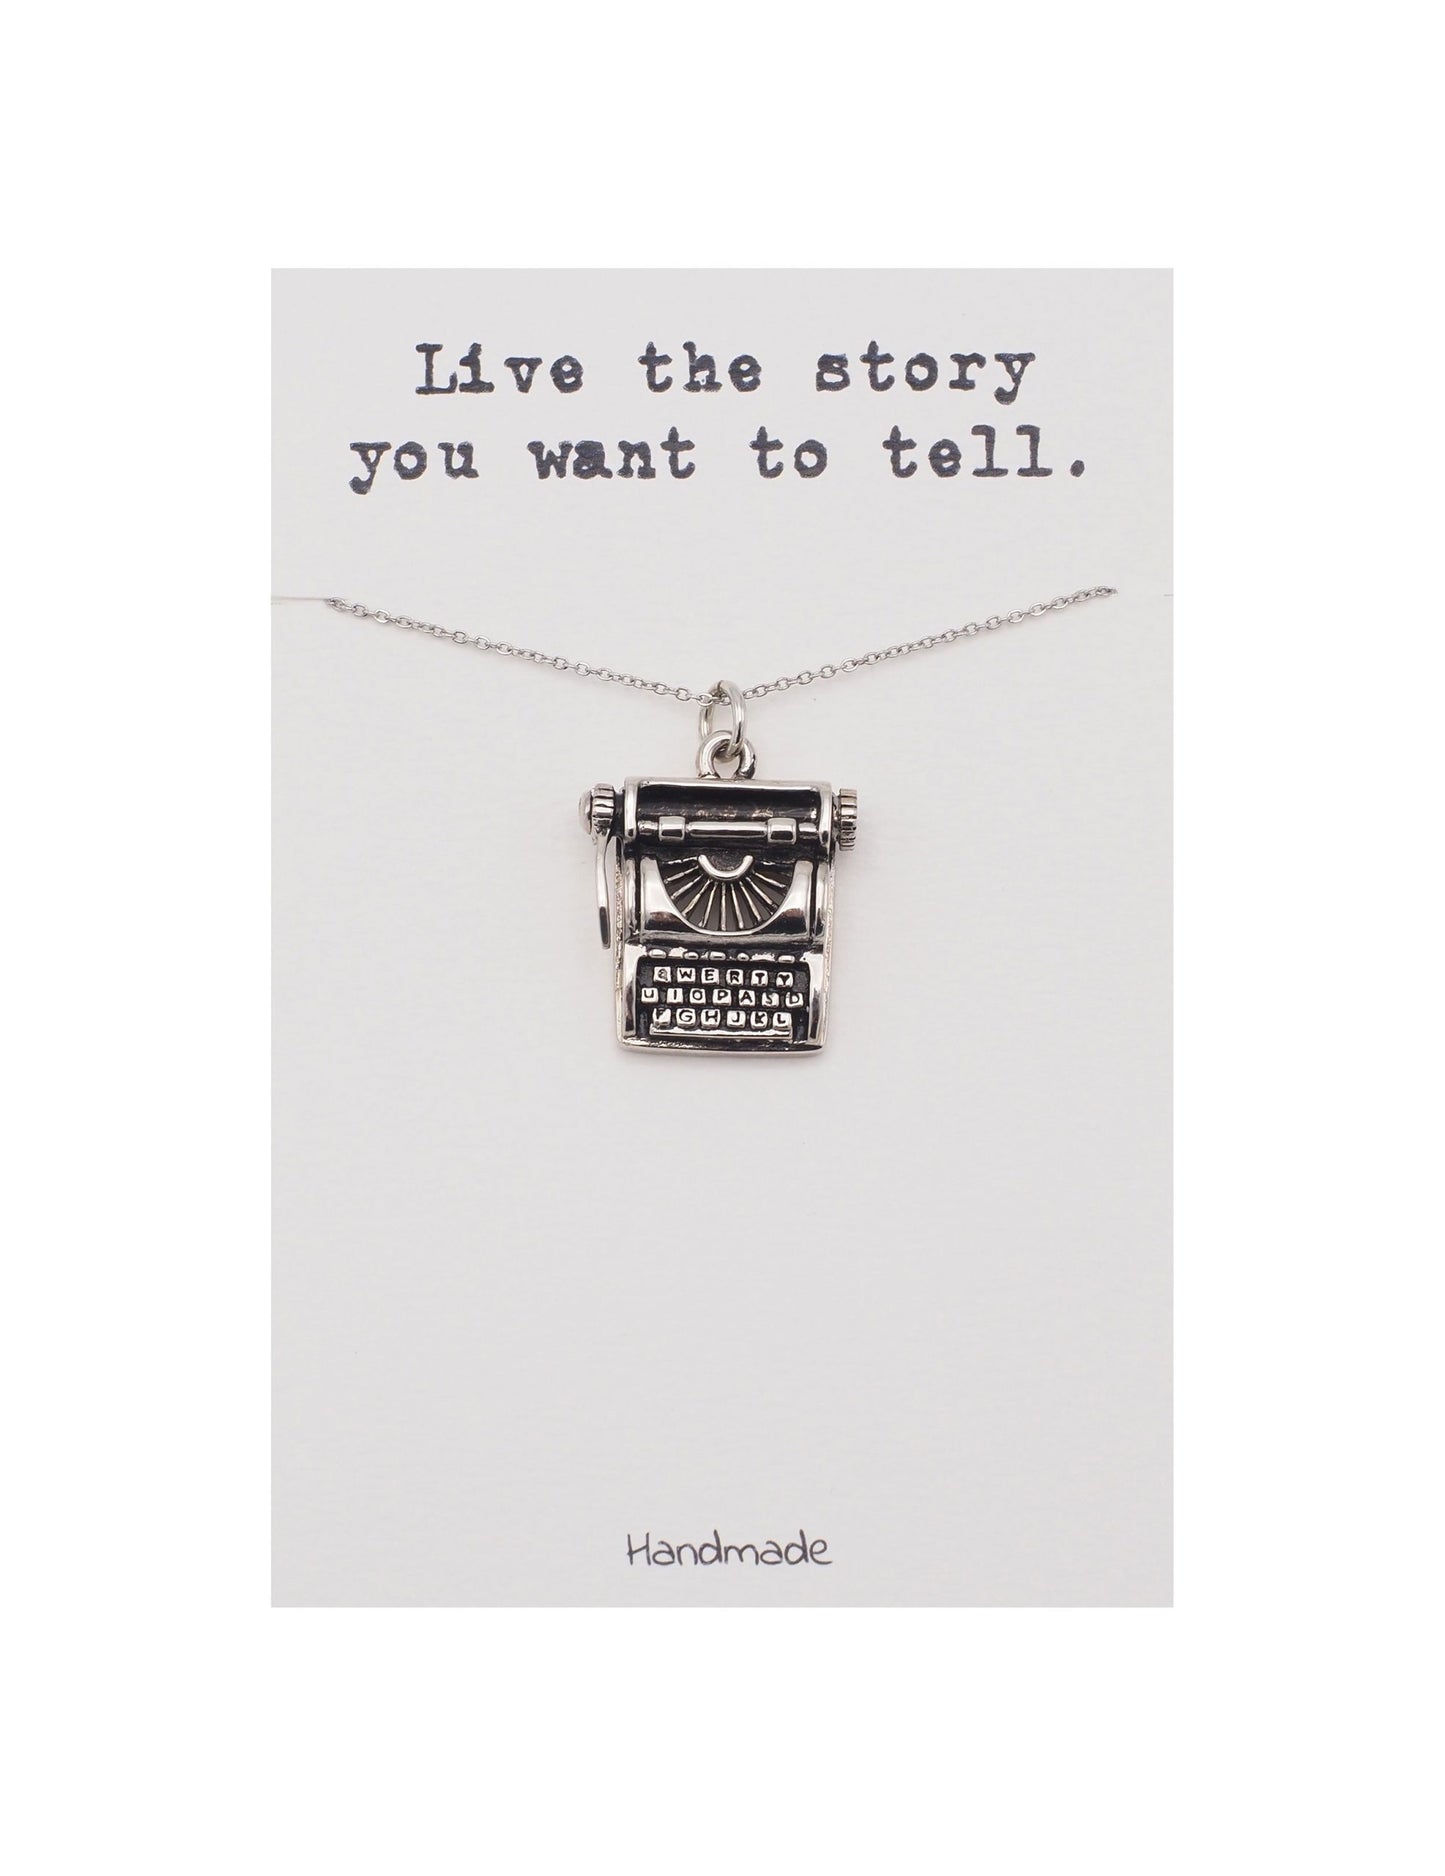 Quinnlyn & Co. Typewriter Pendant Necklace, Birthday Gifts for Women with Inspirational Quote on Greeting Card